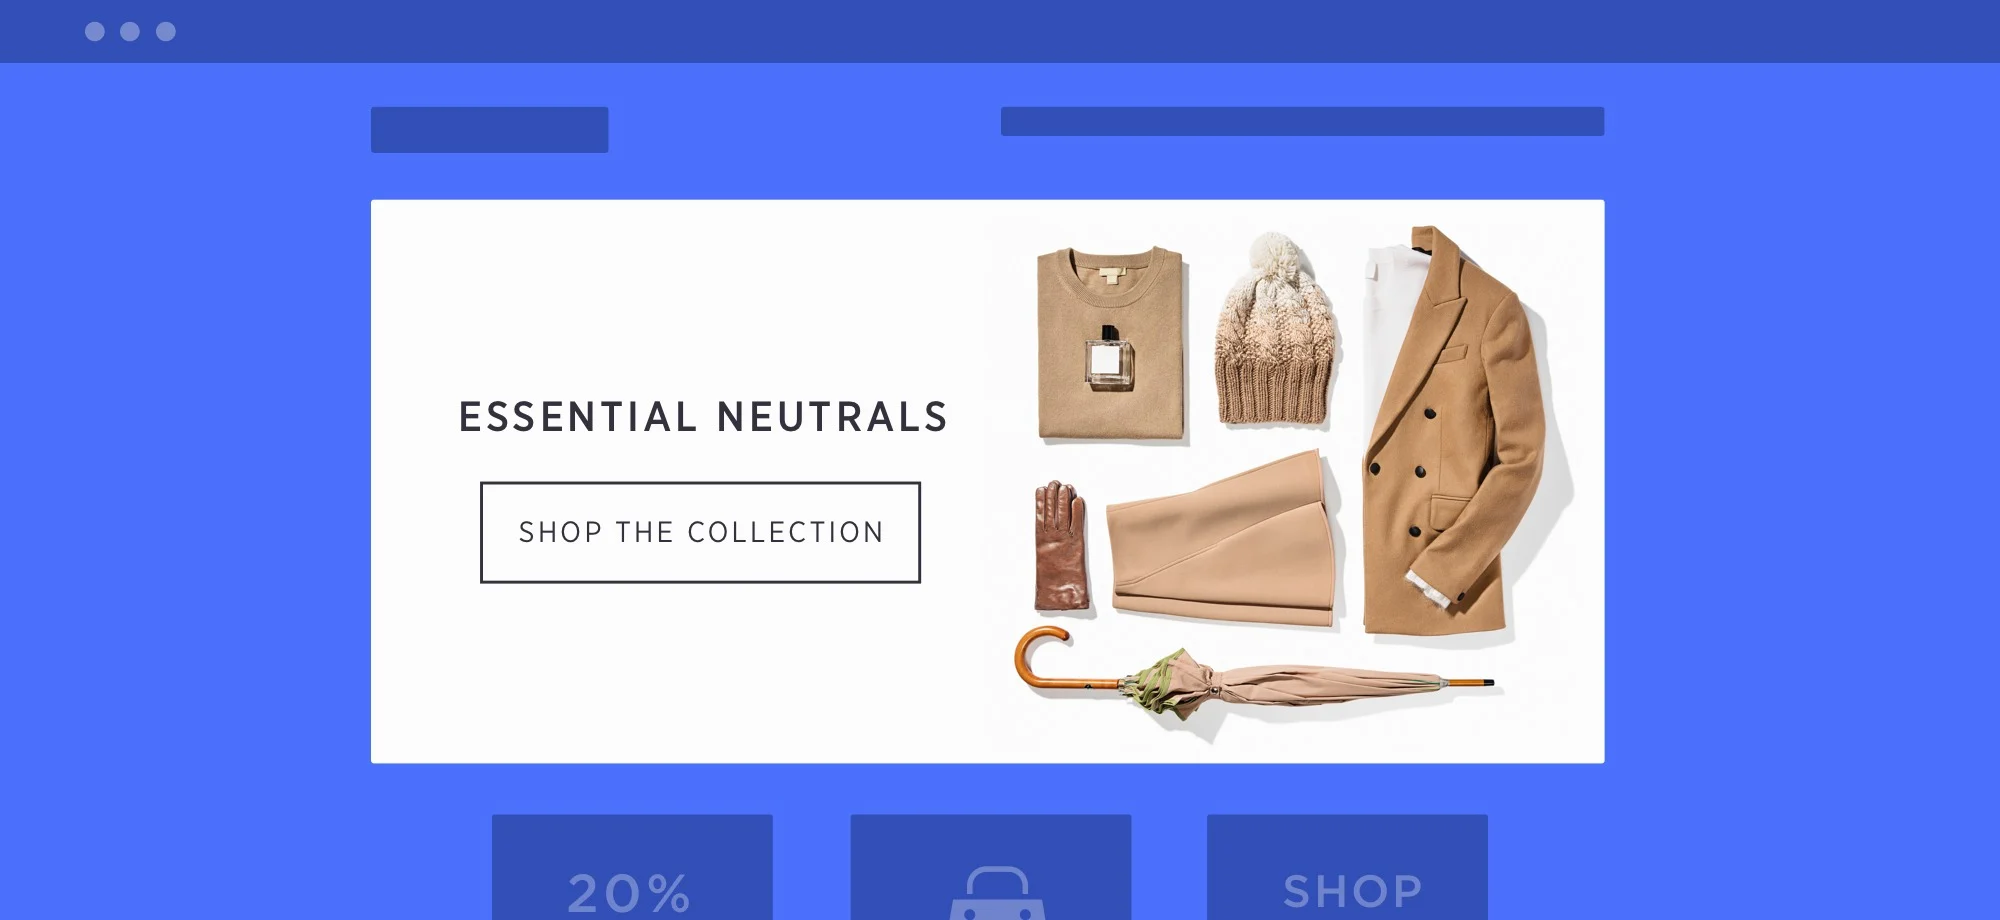 Product Merchandising: 11 Effective Retail Display Ideas - Shopify